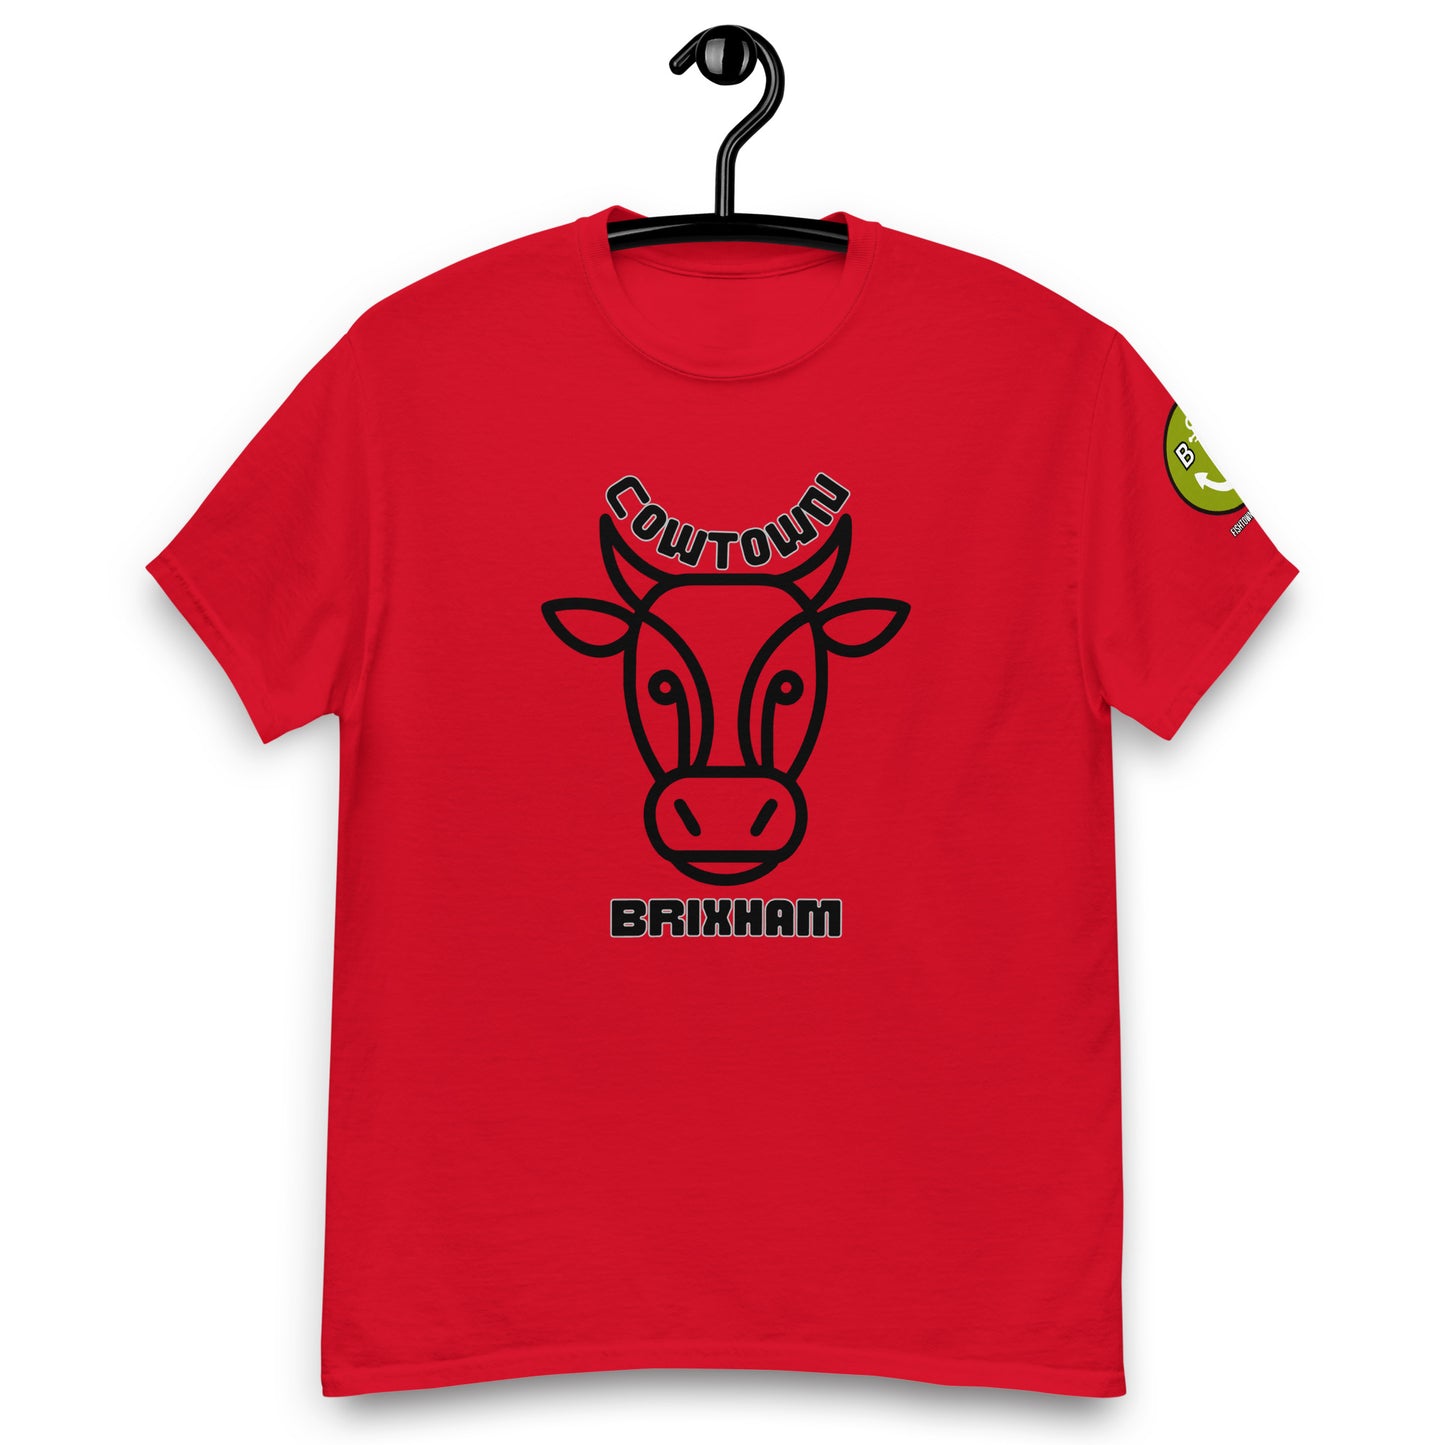 BRIXHAM BM Cowtown Men's classic tee front with logo on left sleeve red